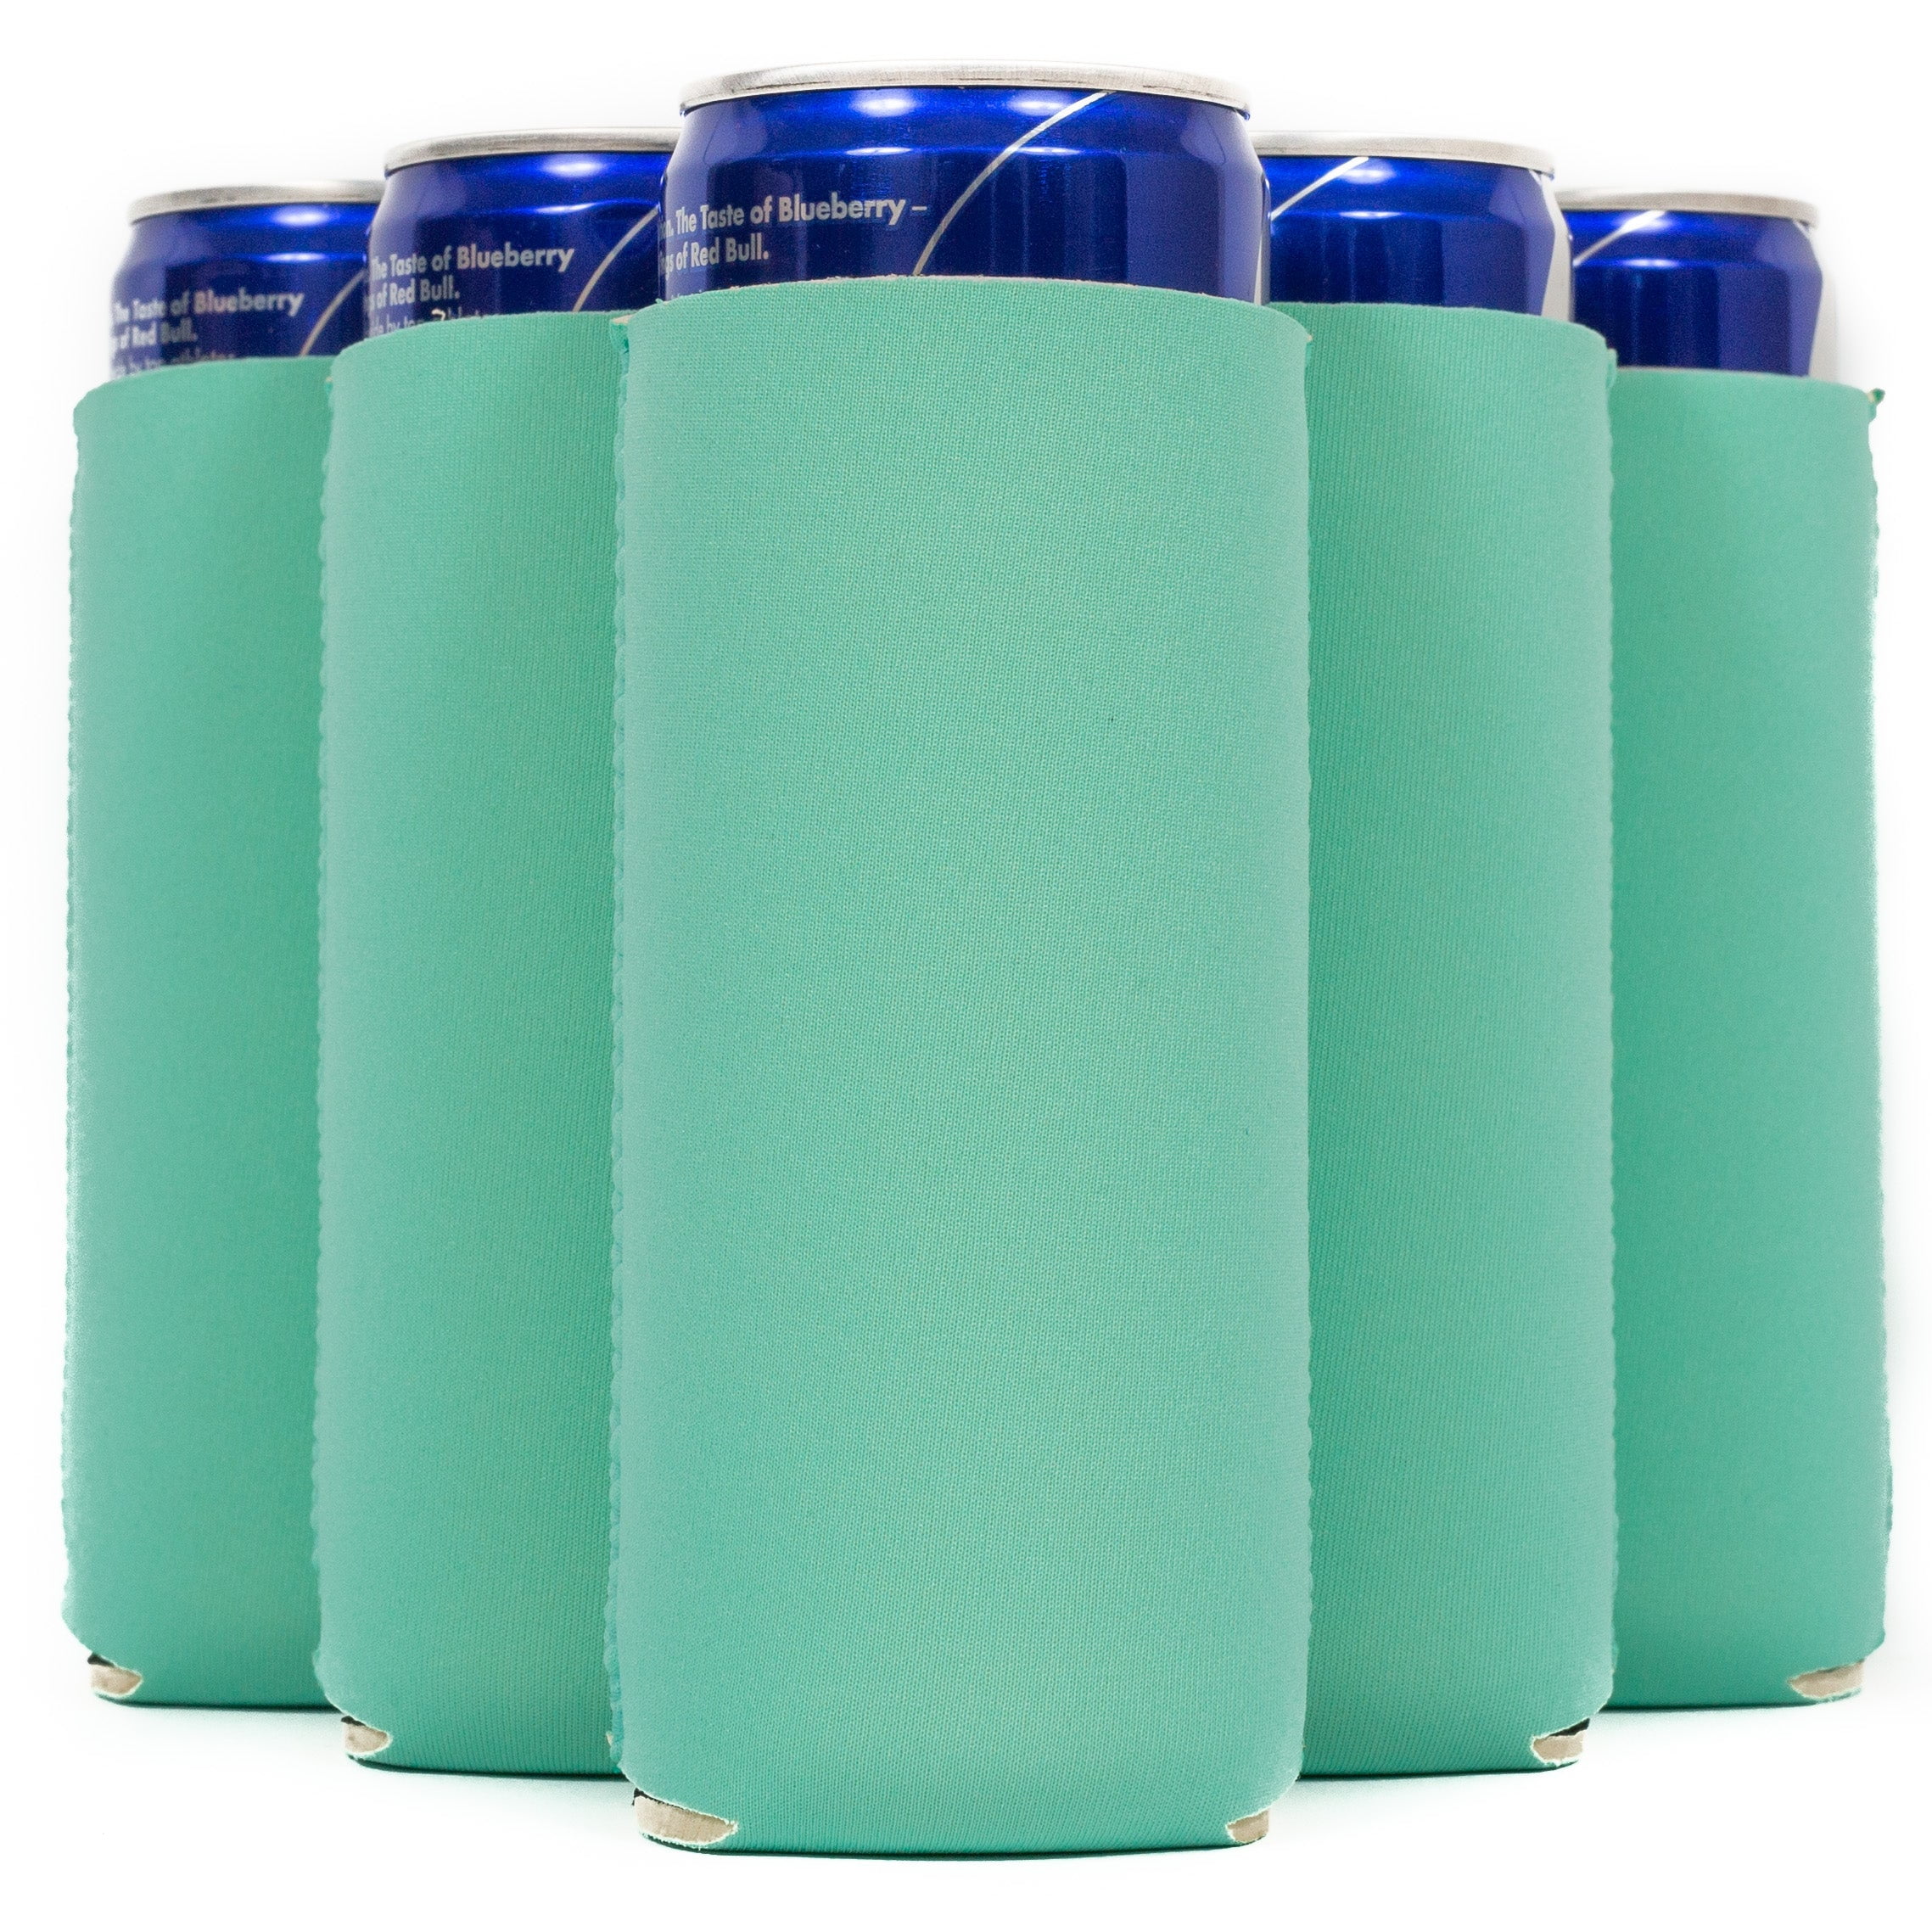  4 in 1 Insulated Slim Can Cooler for 12 OZ Cans and